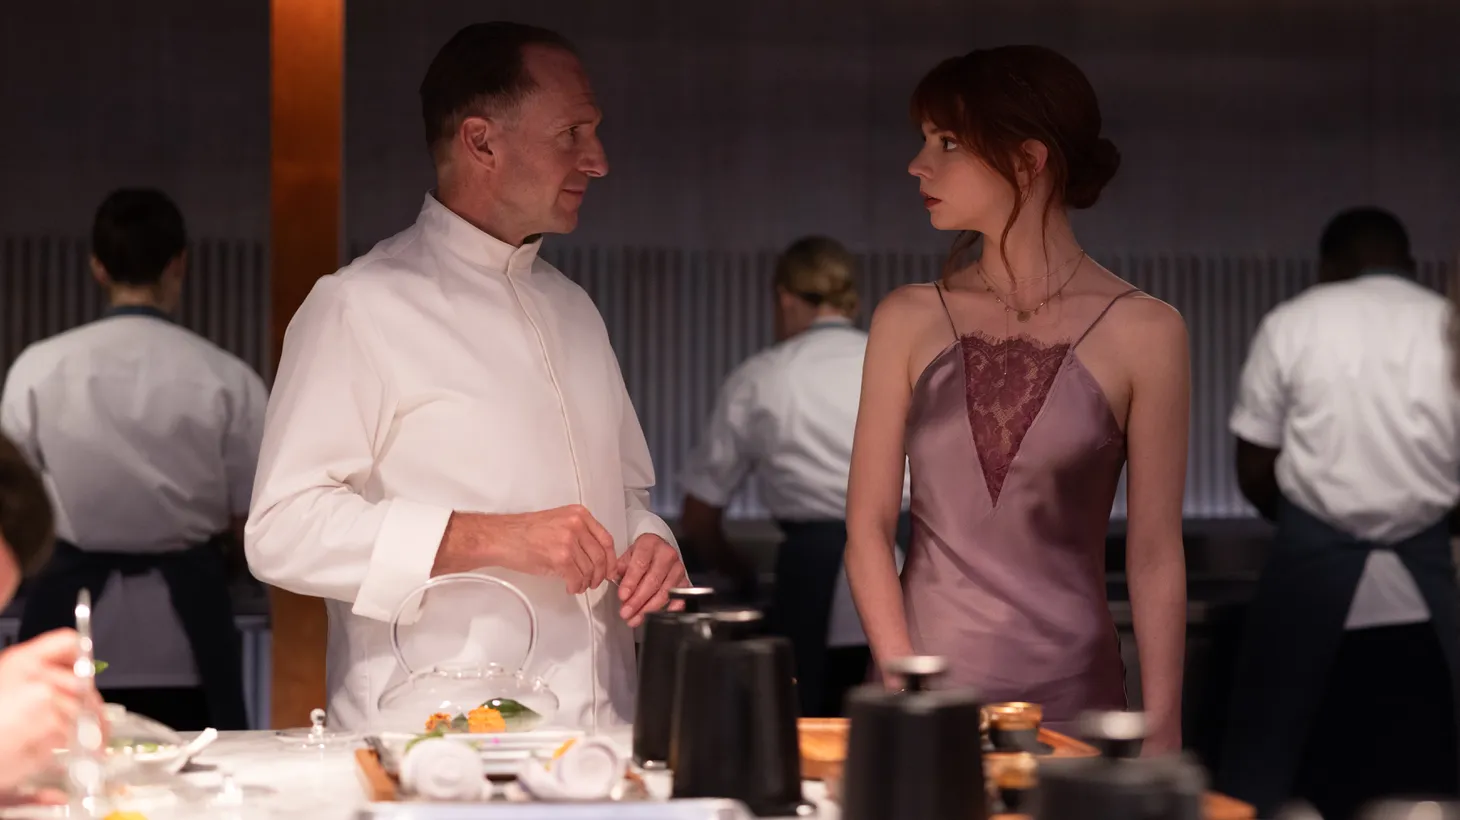 Ralph Fiennes (left) plays Julian Slowik, a chef looking to exact revenge on both his critics and acolytes in "The Menu." He and Anya Taylor-Joy were both nominated for Golden Globes for their roles.